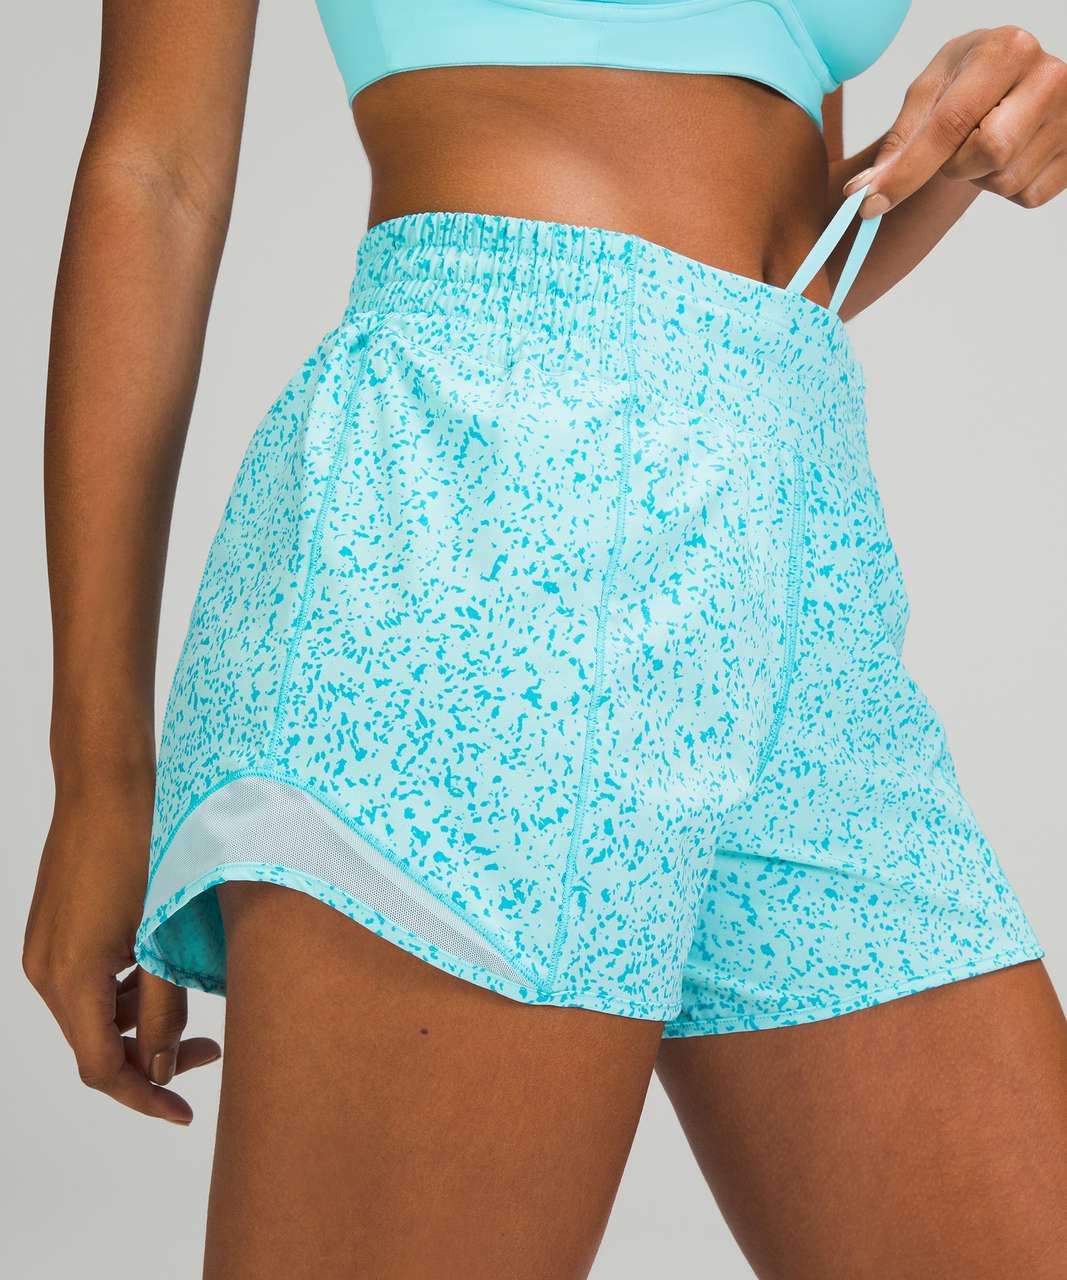 Lululemon SeaWheeze Hotty Hot High-Rise Lined Short 4 - Outer Pace Speckle  Cyan Blue Turquoise Tide / Icing Blue - lulu fanatics